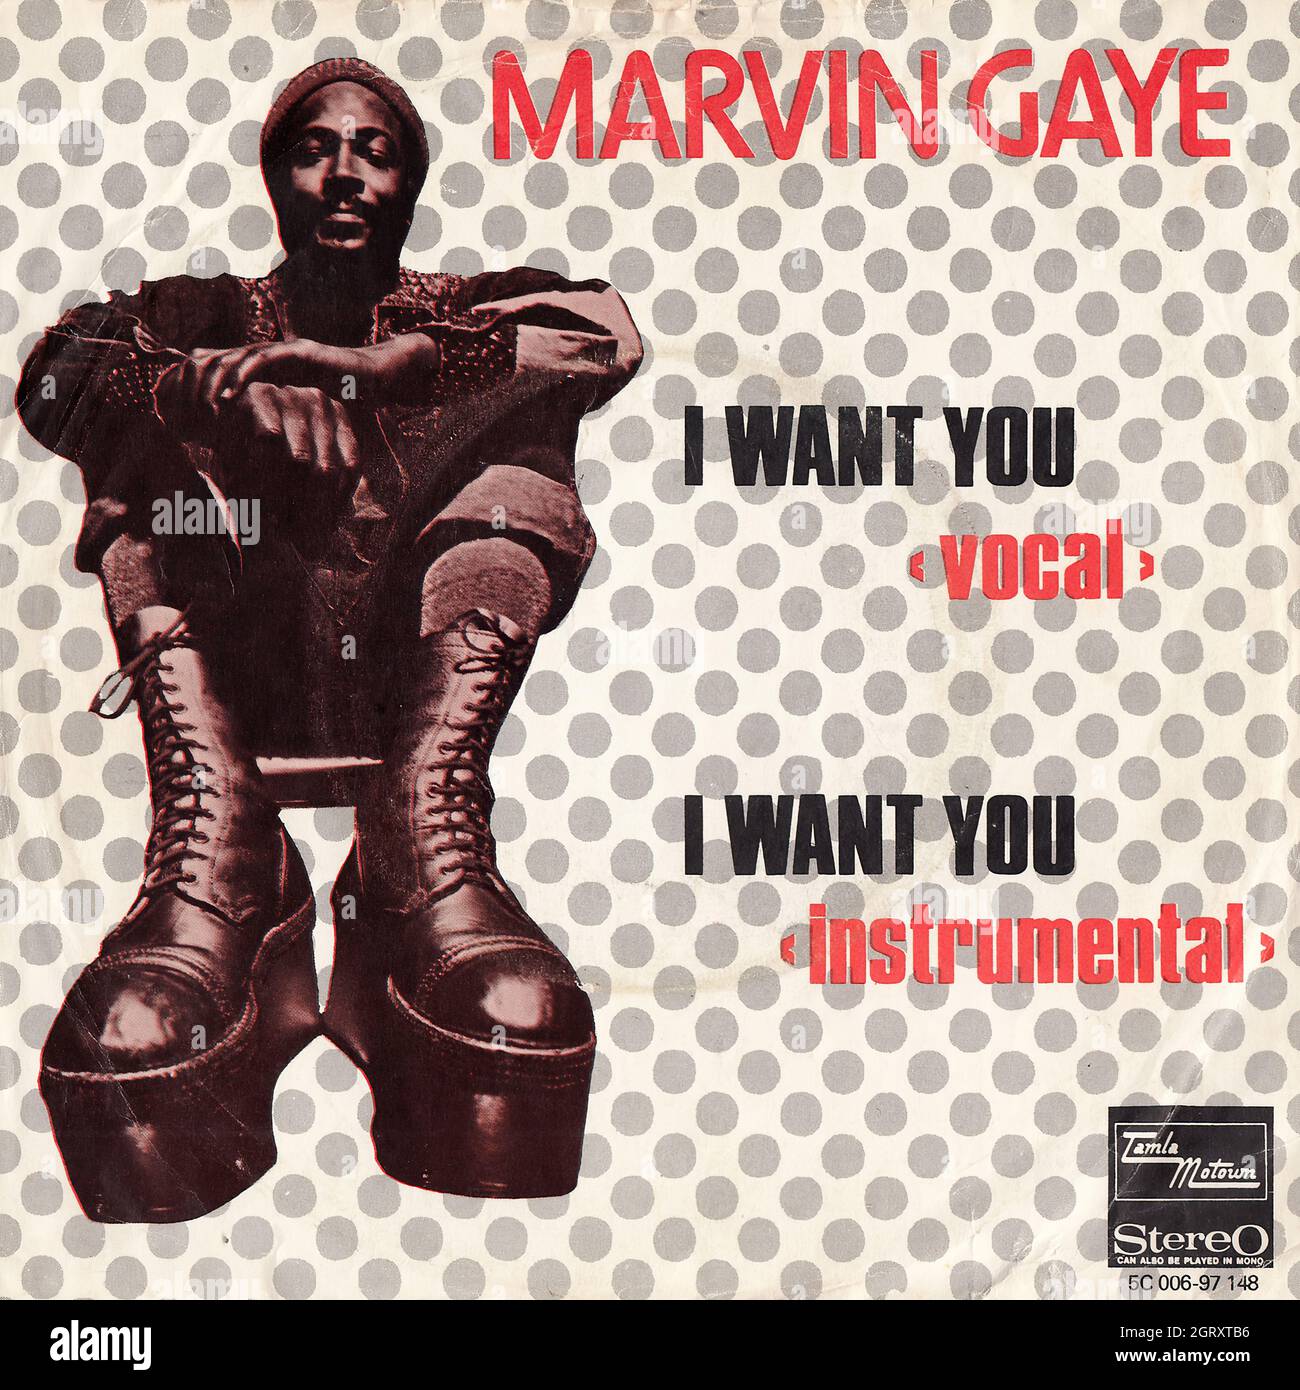 Marvin Gaye - I want you (vocal & instrumental) 45rpm - Vintage Vinyl Record Cover Stock Photo